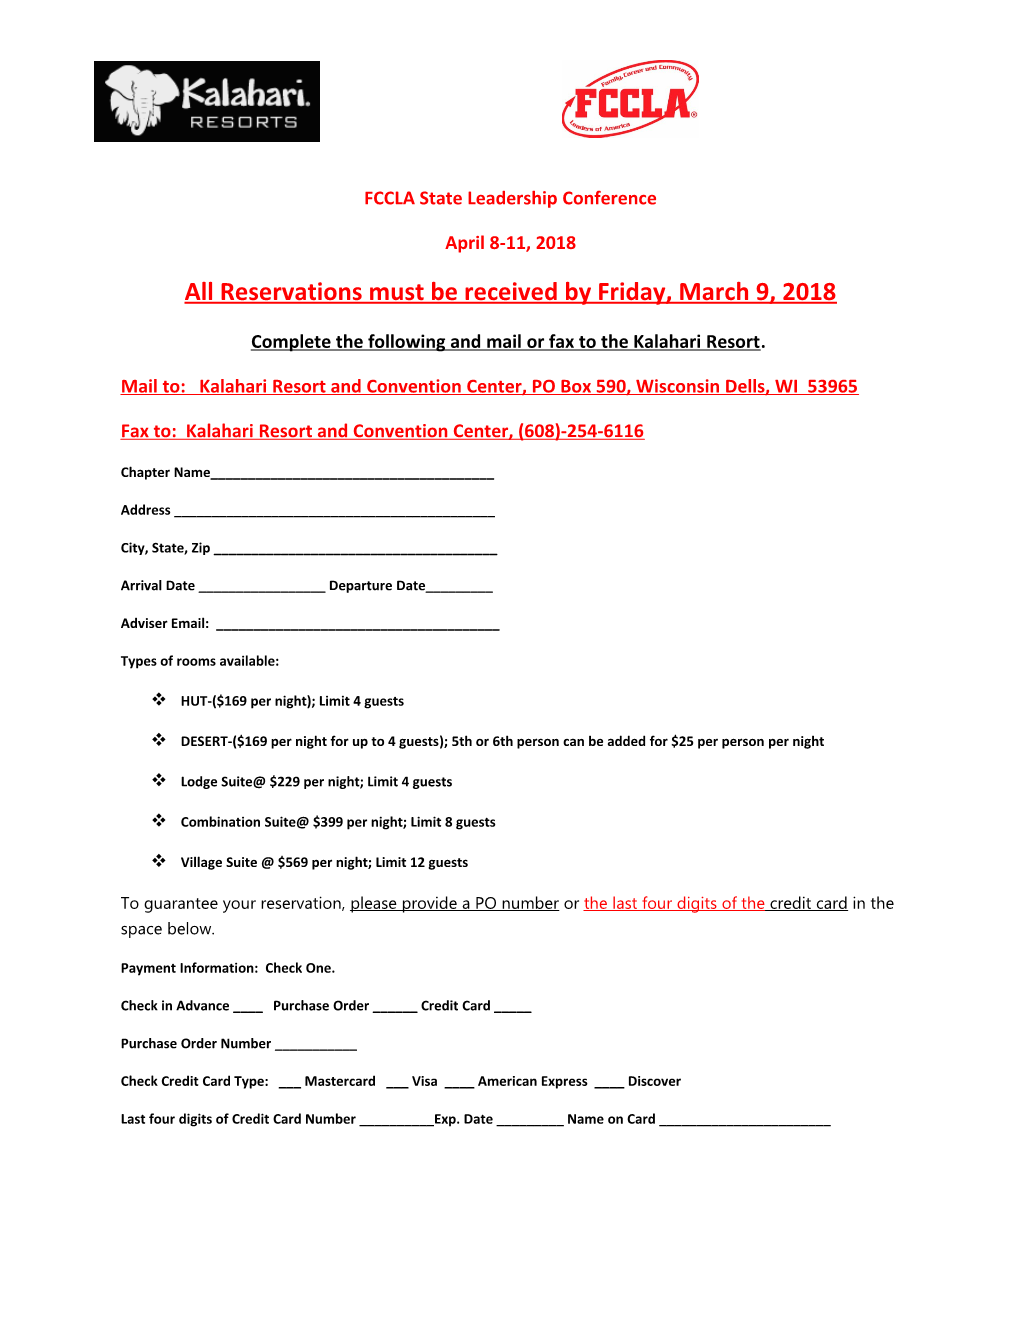 Wisconsin FCCLA State Leadership Conference Lodging Reservations Template